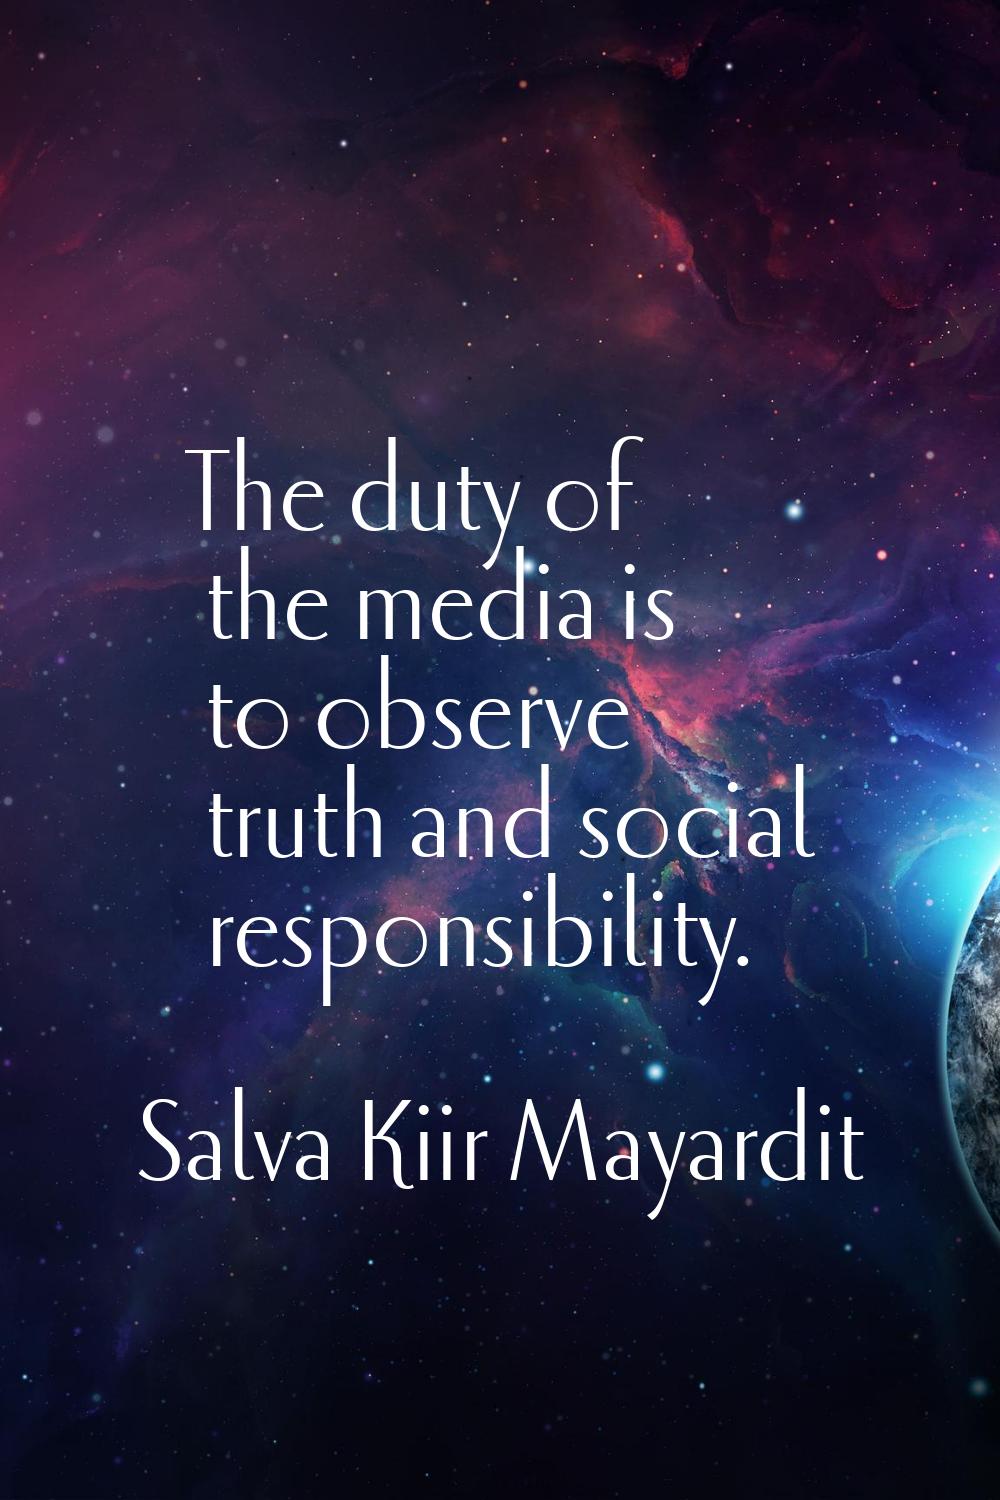 The duty of the media is to observe truth and social responsibility.